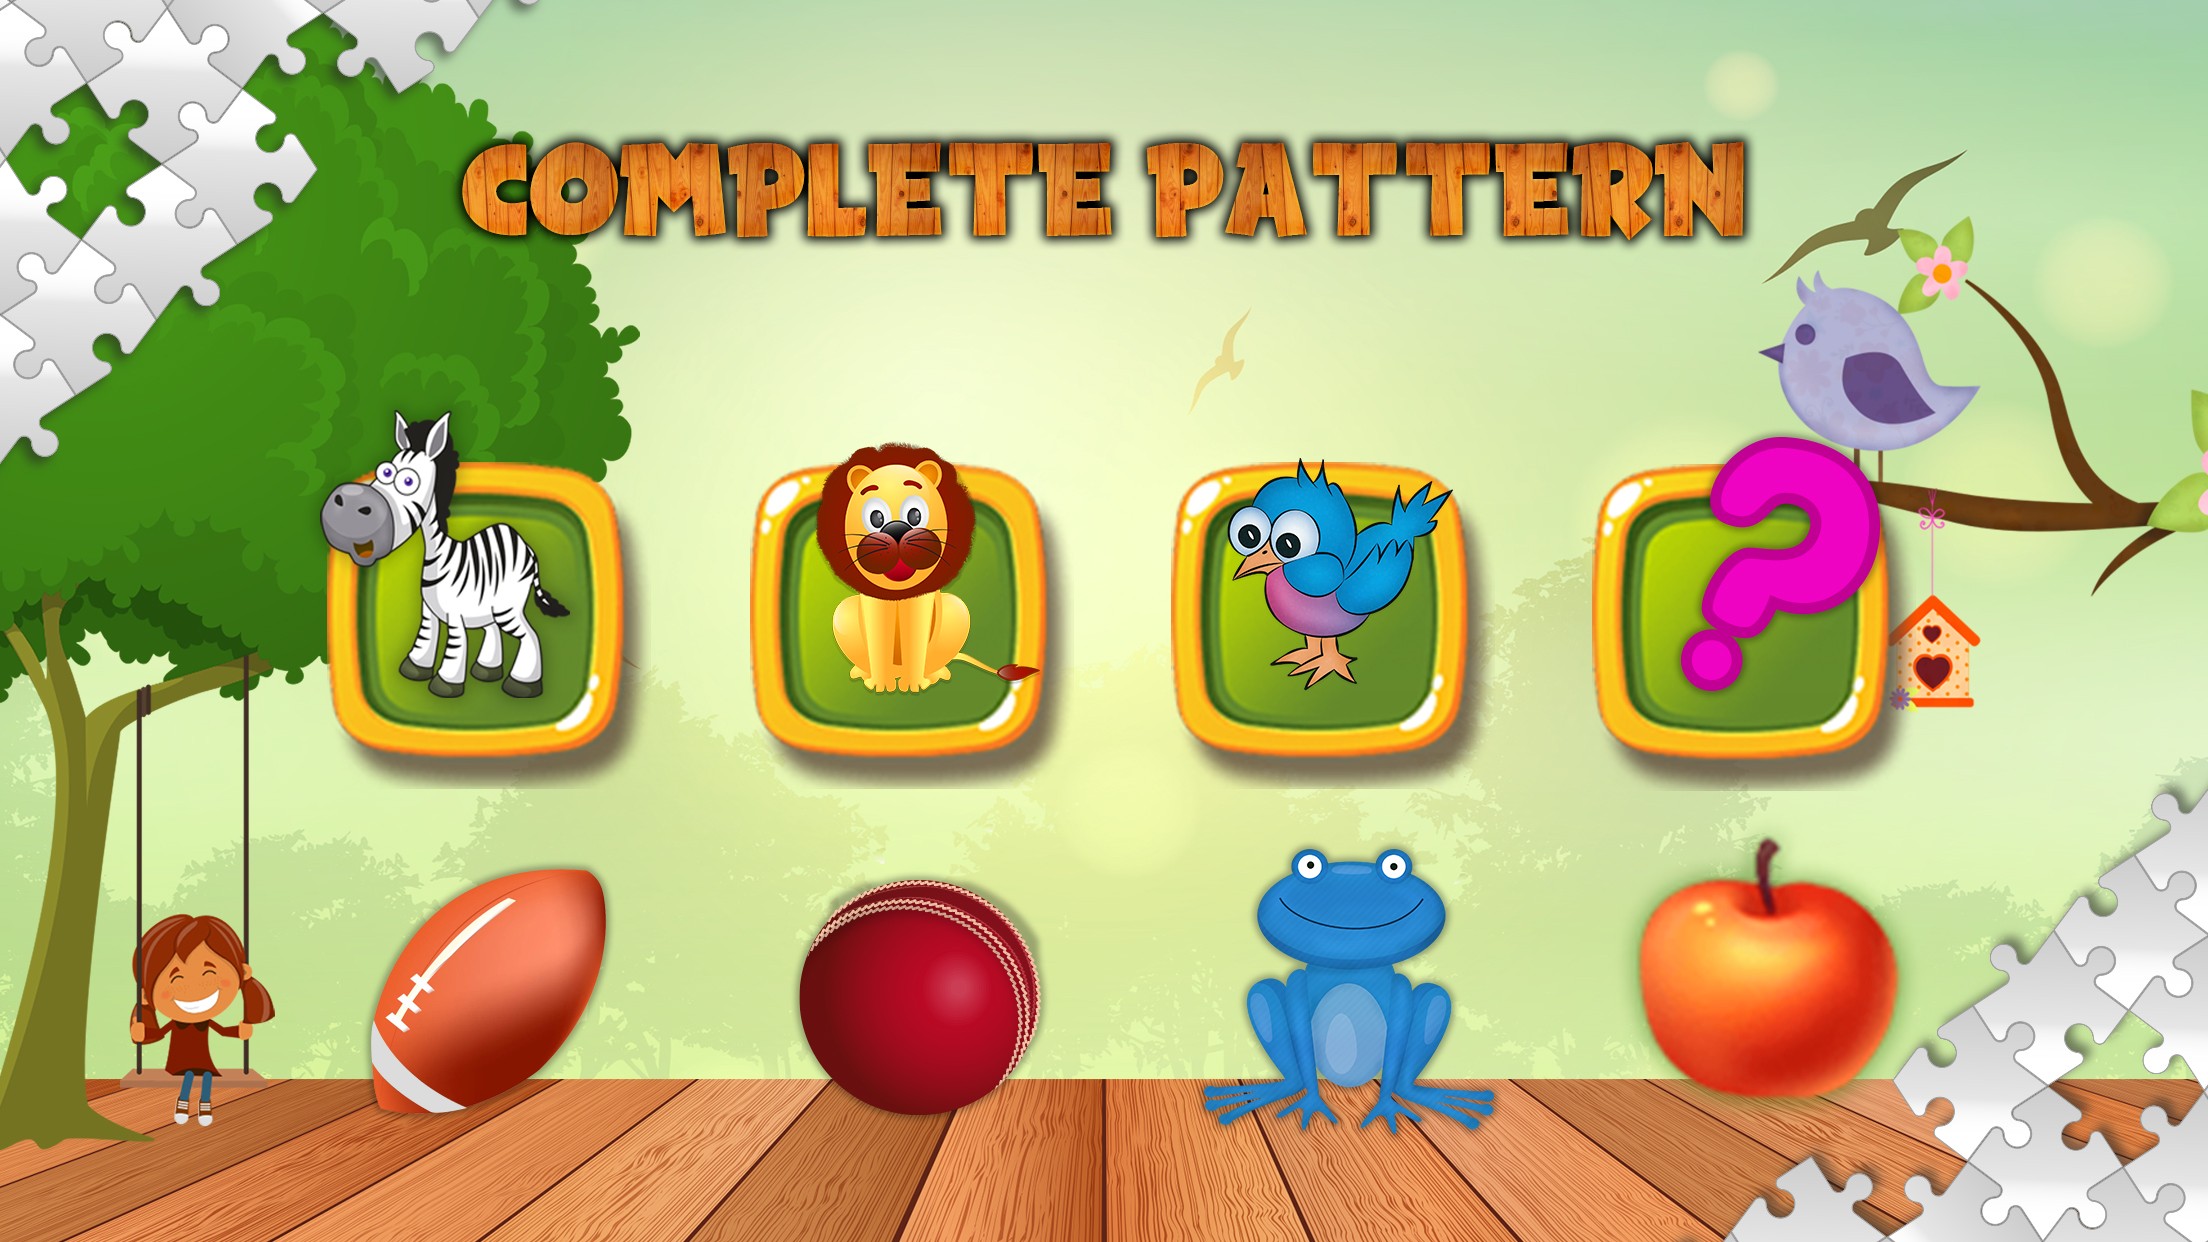 Kids Preschool Learning Games for iphone download